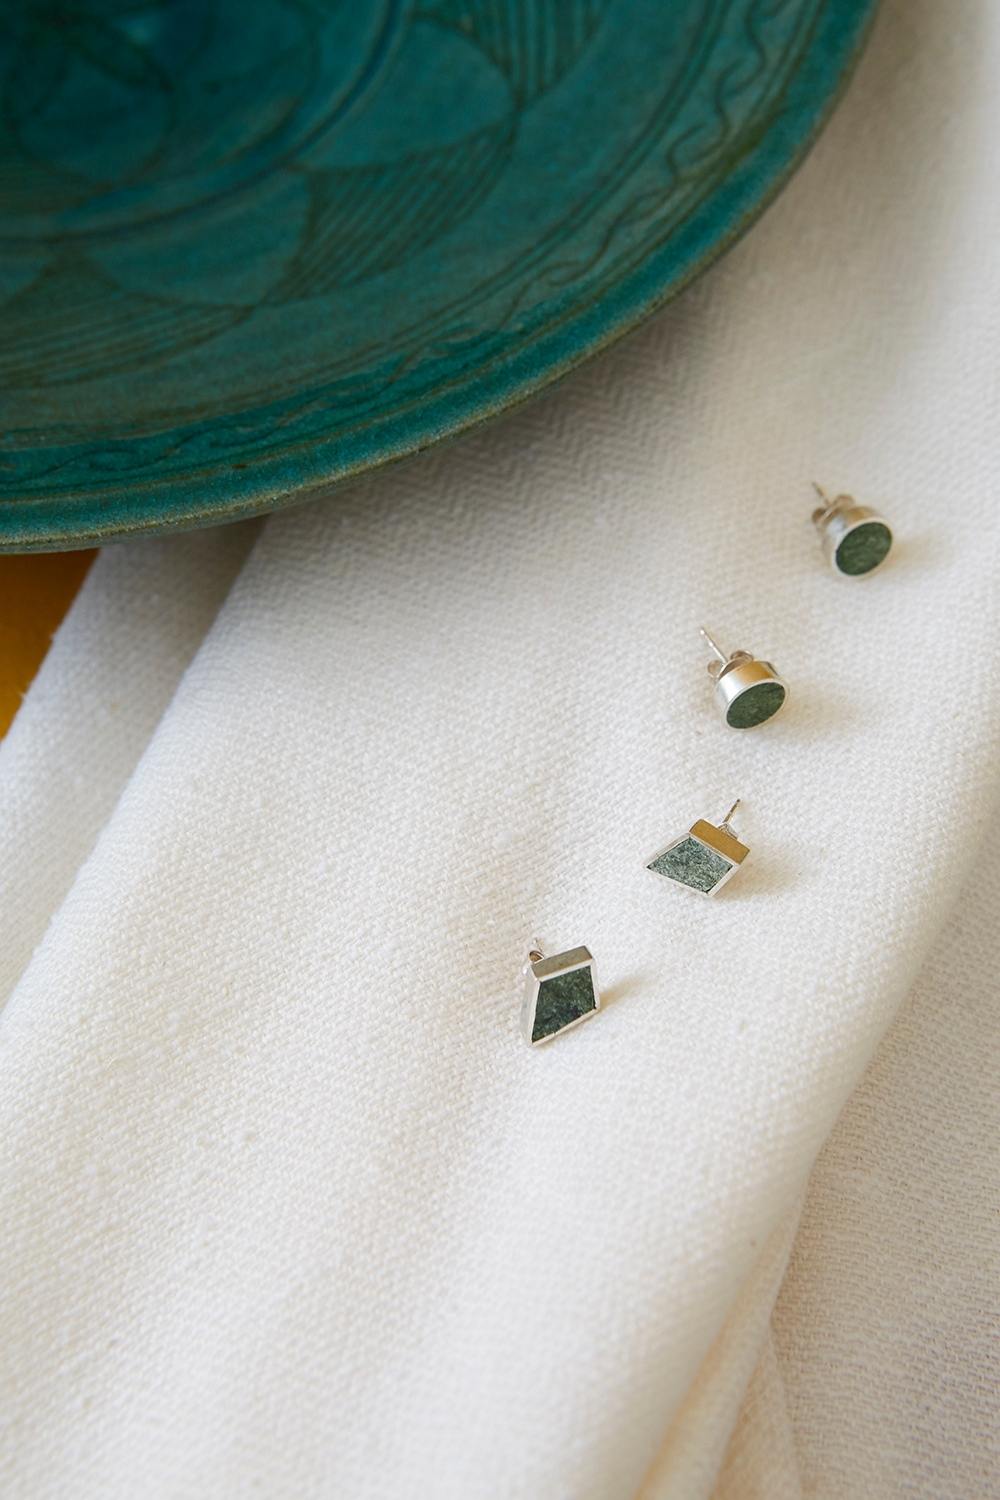 Artisan & Fox - Jewellery - KITE Silver Earstuds in Bamiyan Turquoise - Handcrafted in Afghanistan